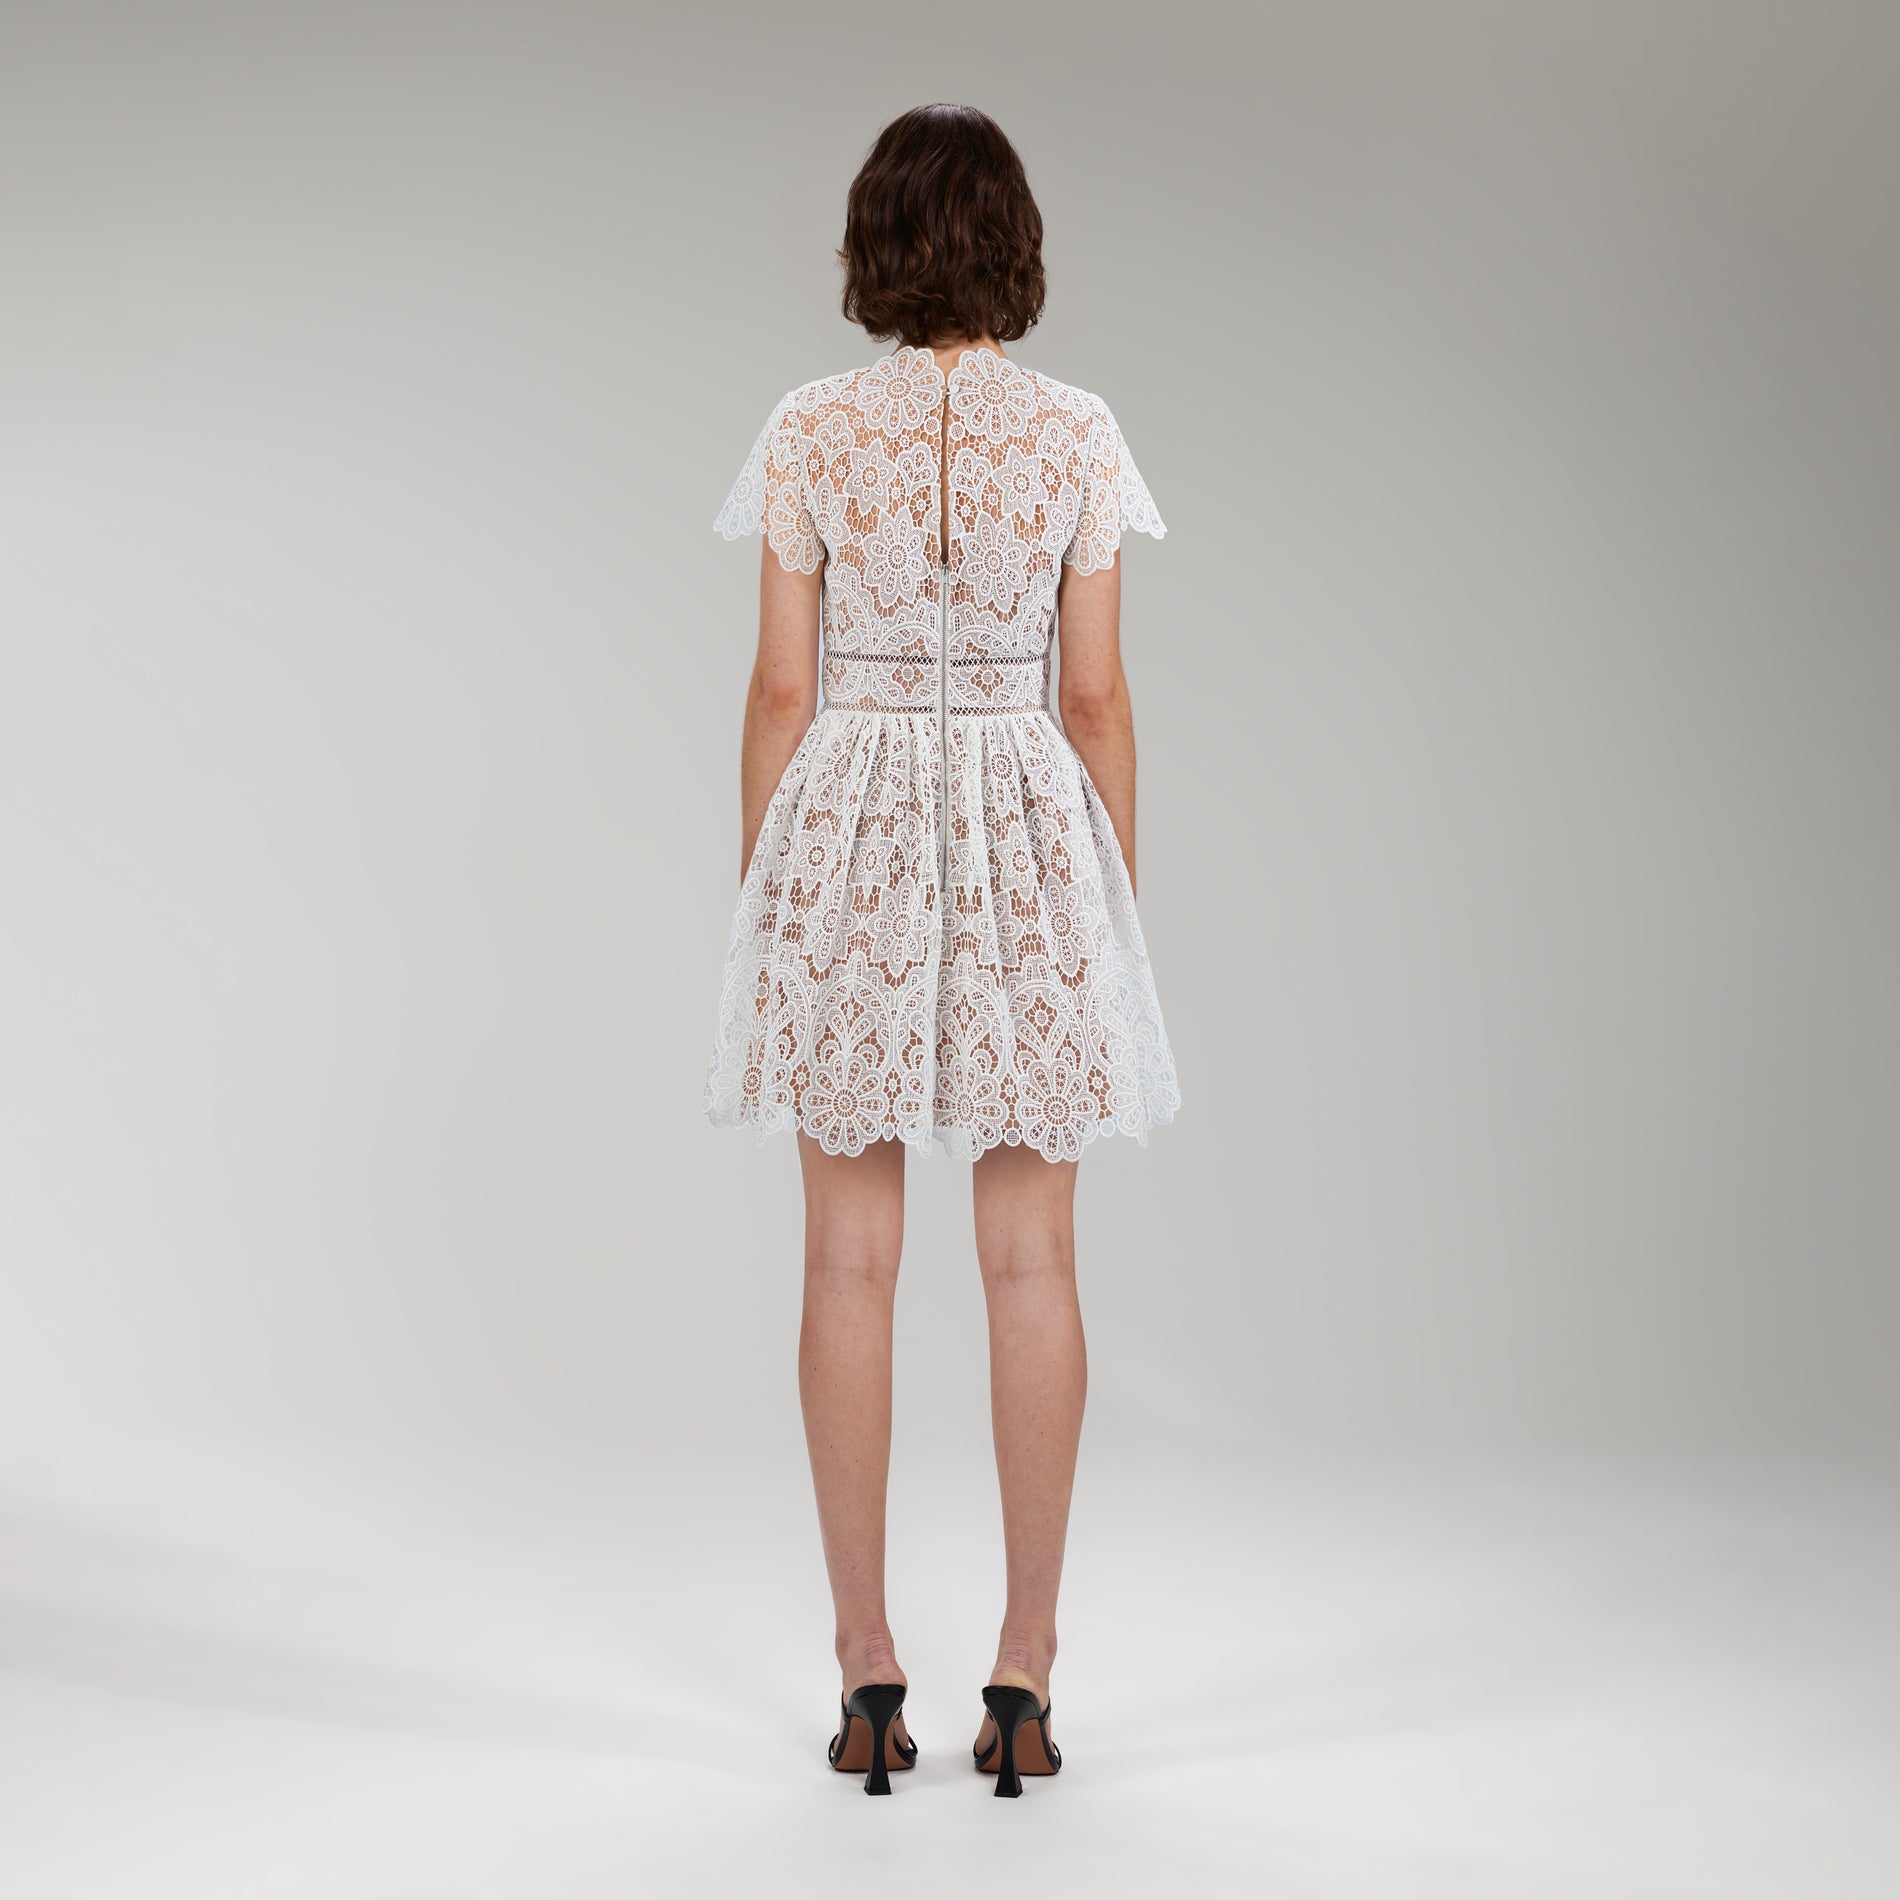 A woman wearing the White Floral Guipure Lace Mini Dress